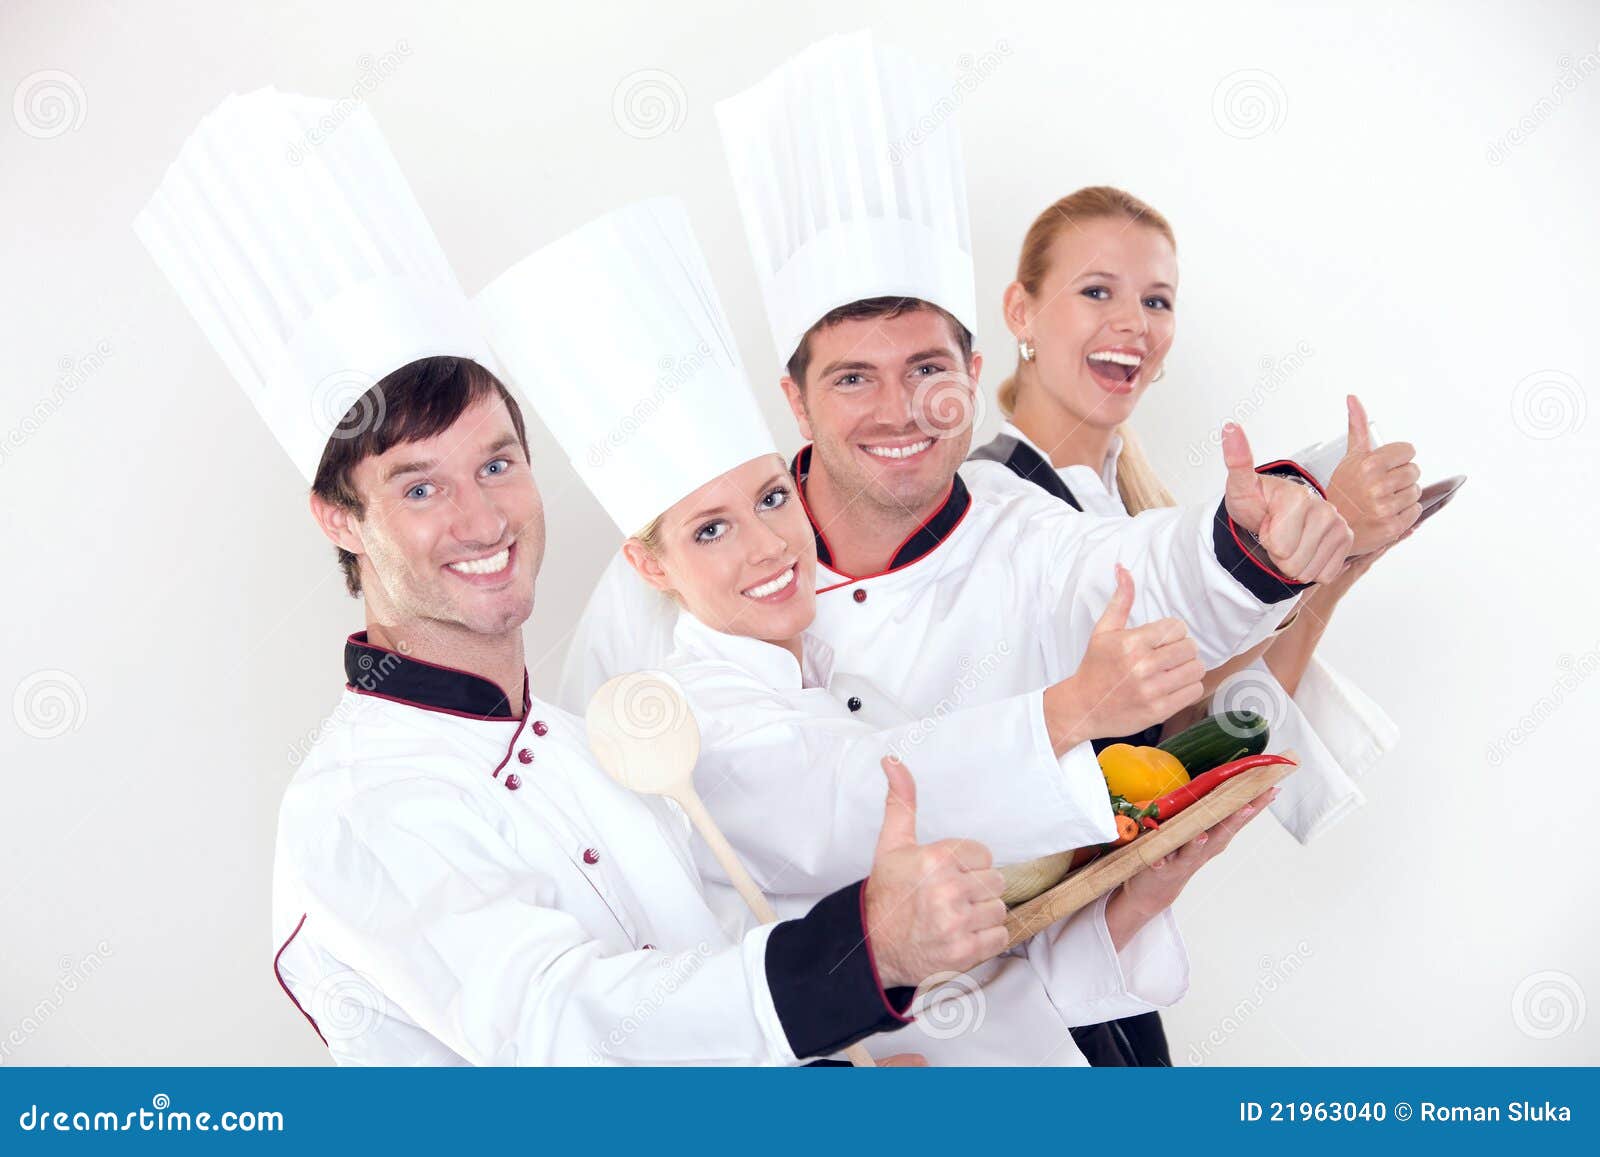 restaurant workers clipart - photo #44